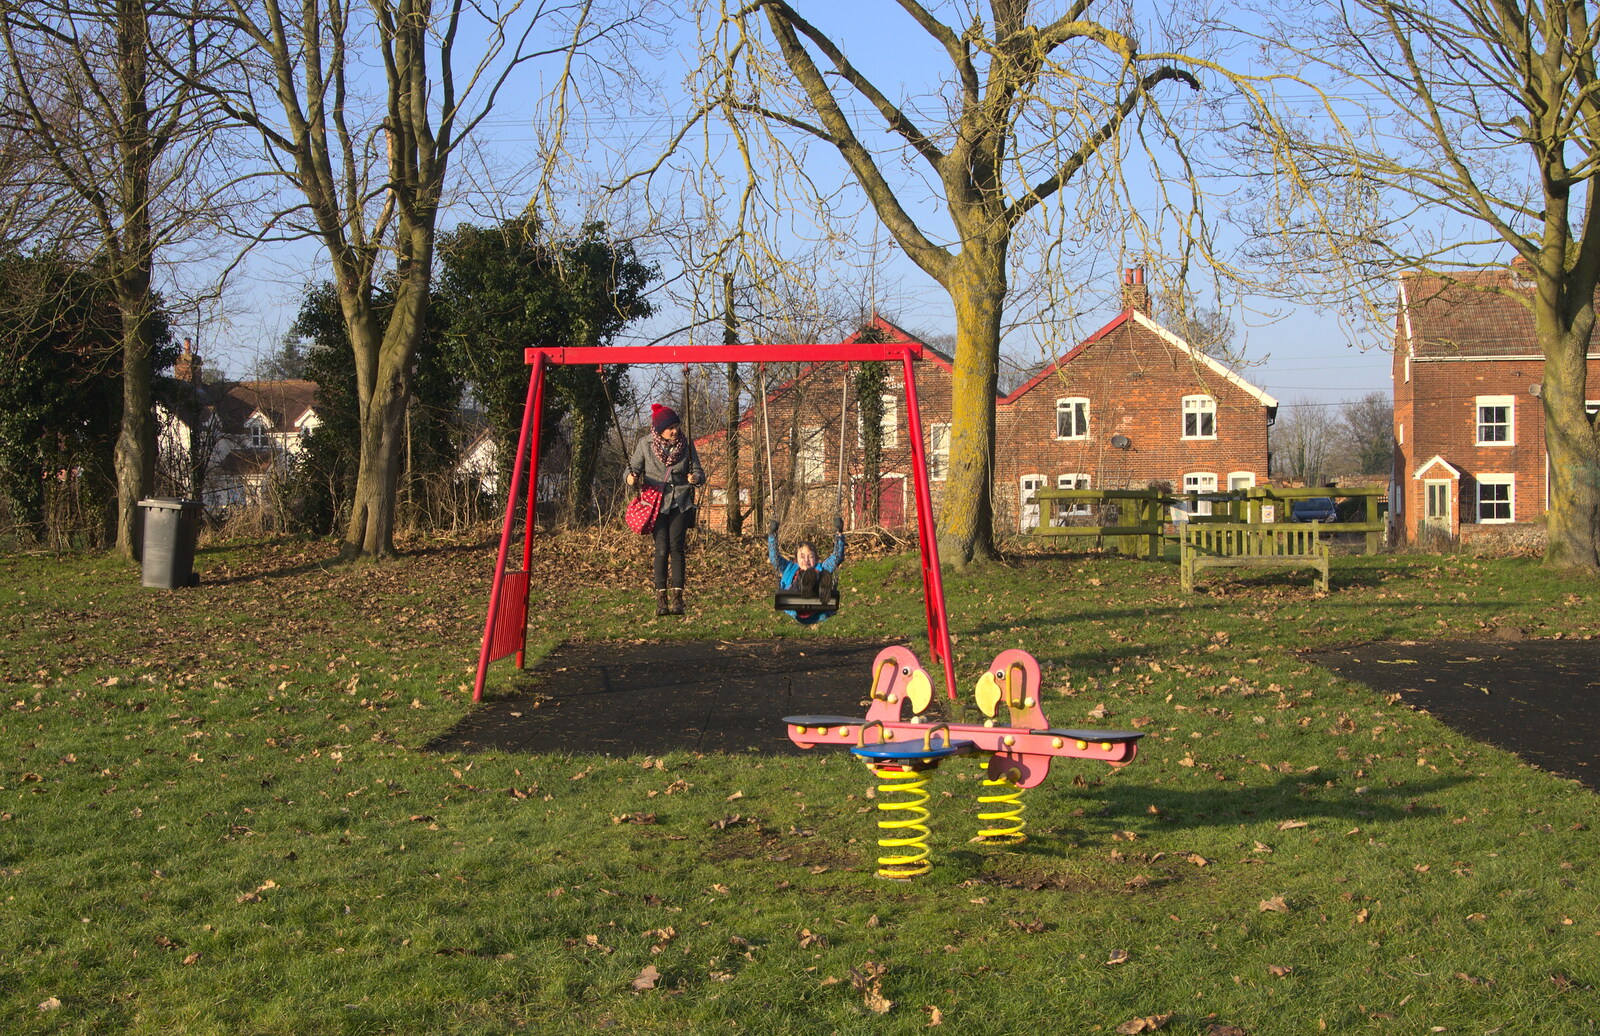 Isobel and Fred on the swings from A Day in Lavenham, Suffolk - 22nd January 2017